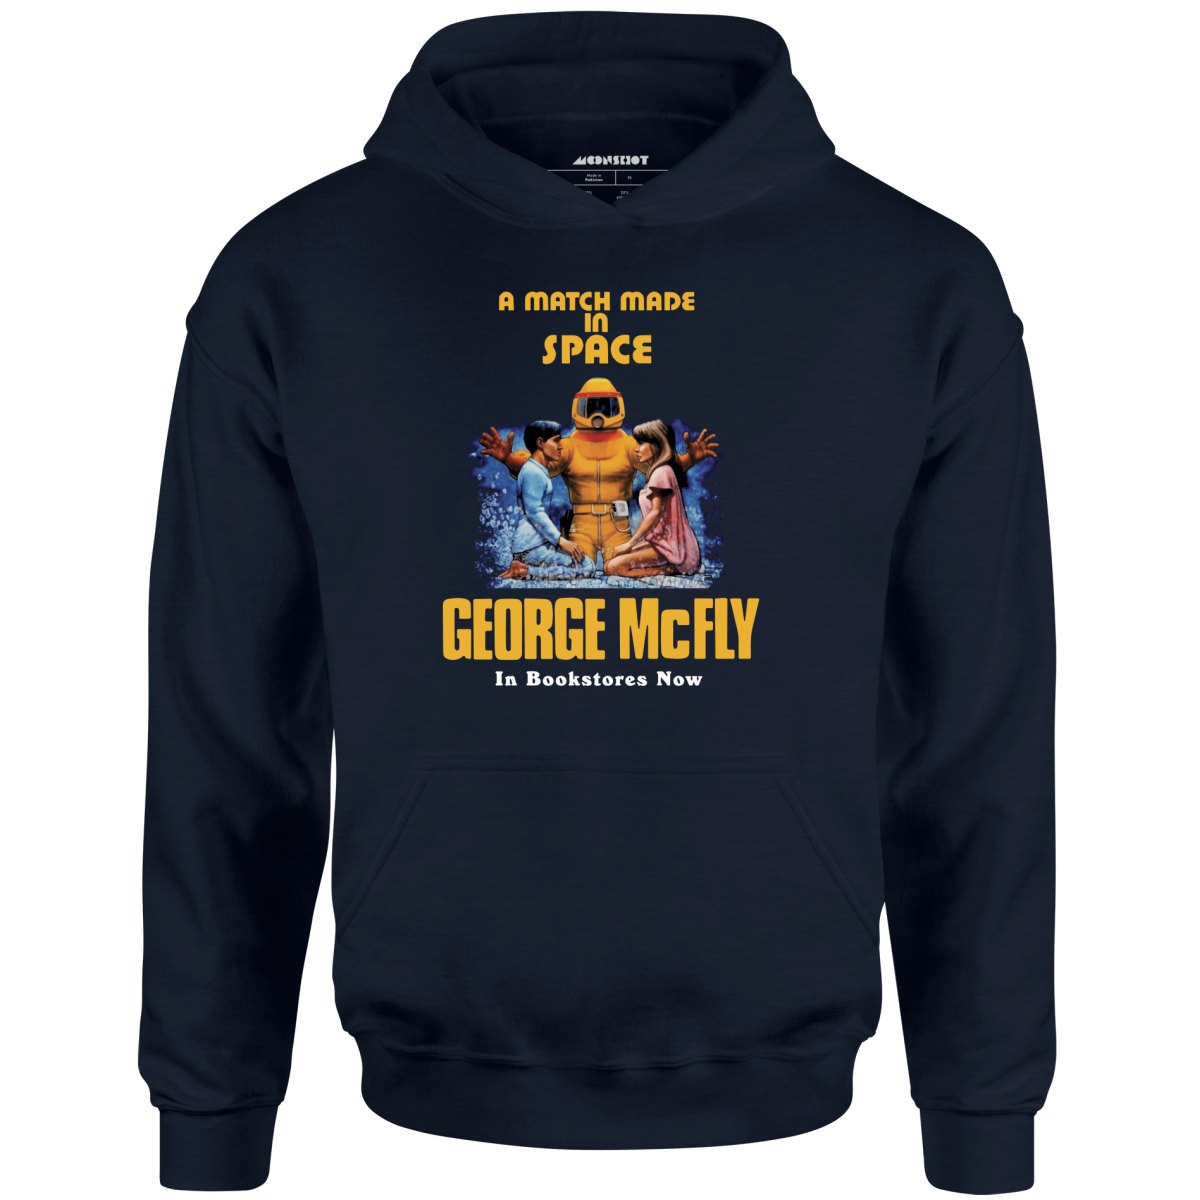 A Match Made in Space - Unisex Hoodie